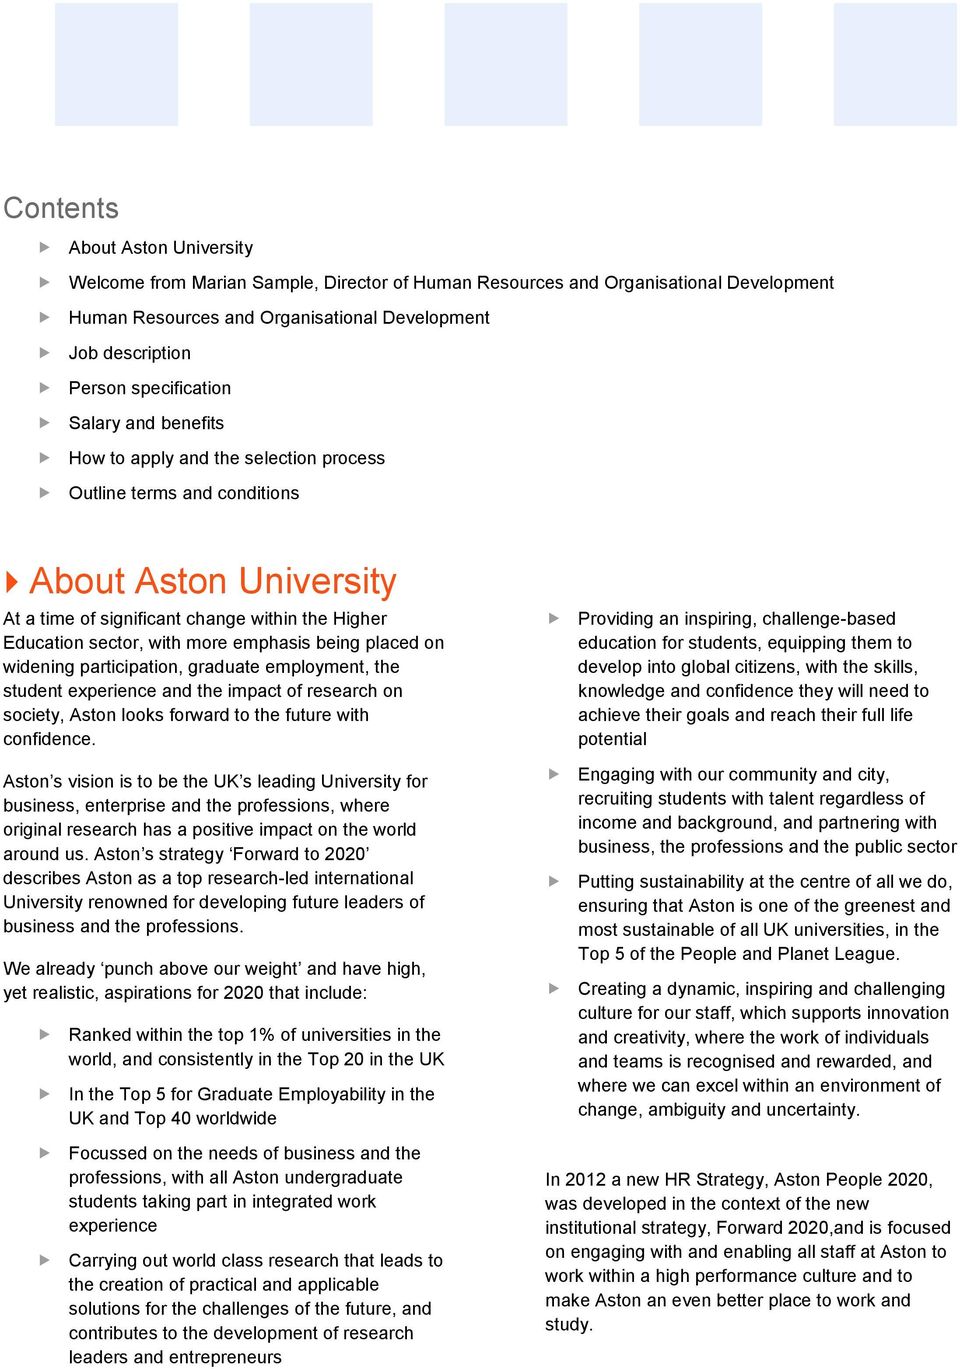 more emphasis being placed on widening participation, graduate employment, the student experience and the impact of research on society, Aston looks forward to the future with confidence.